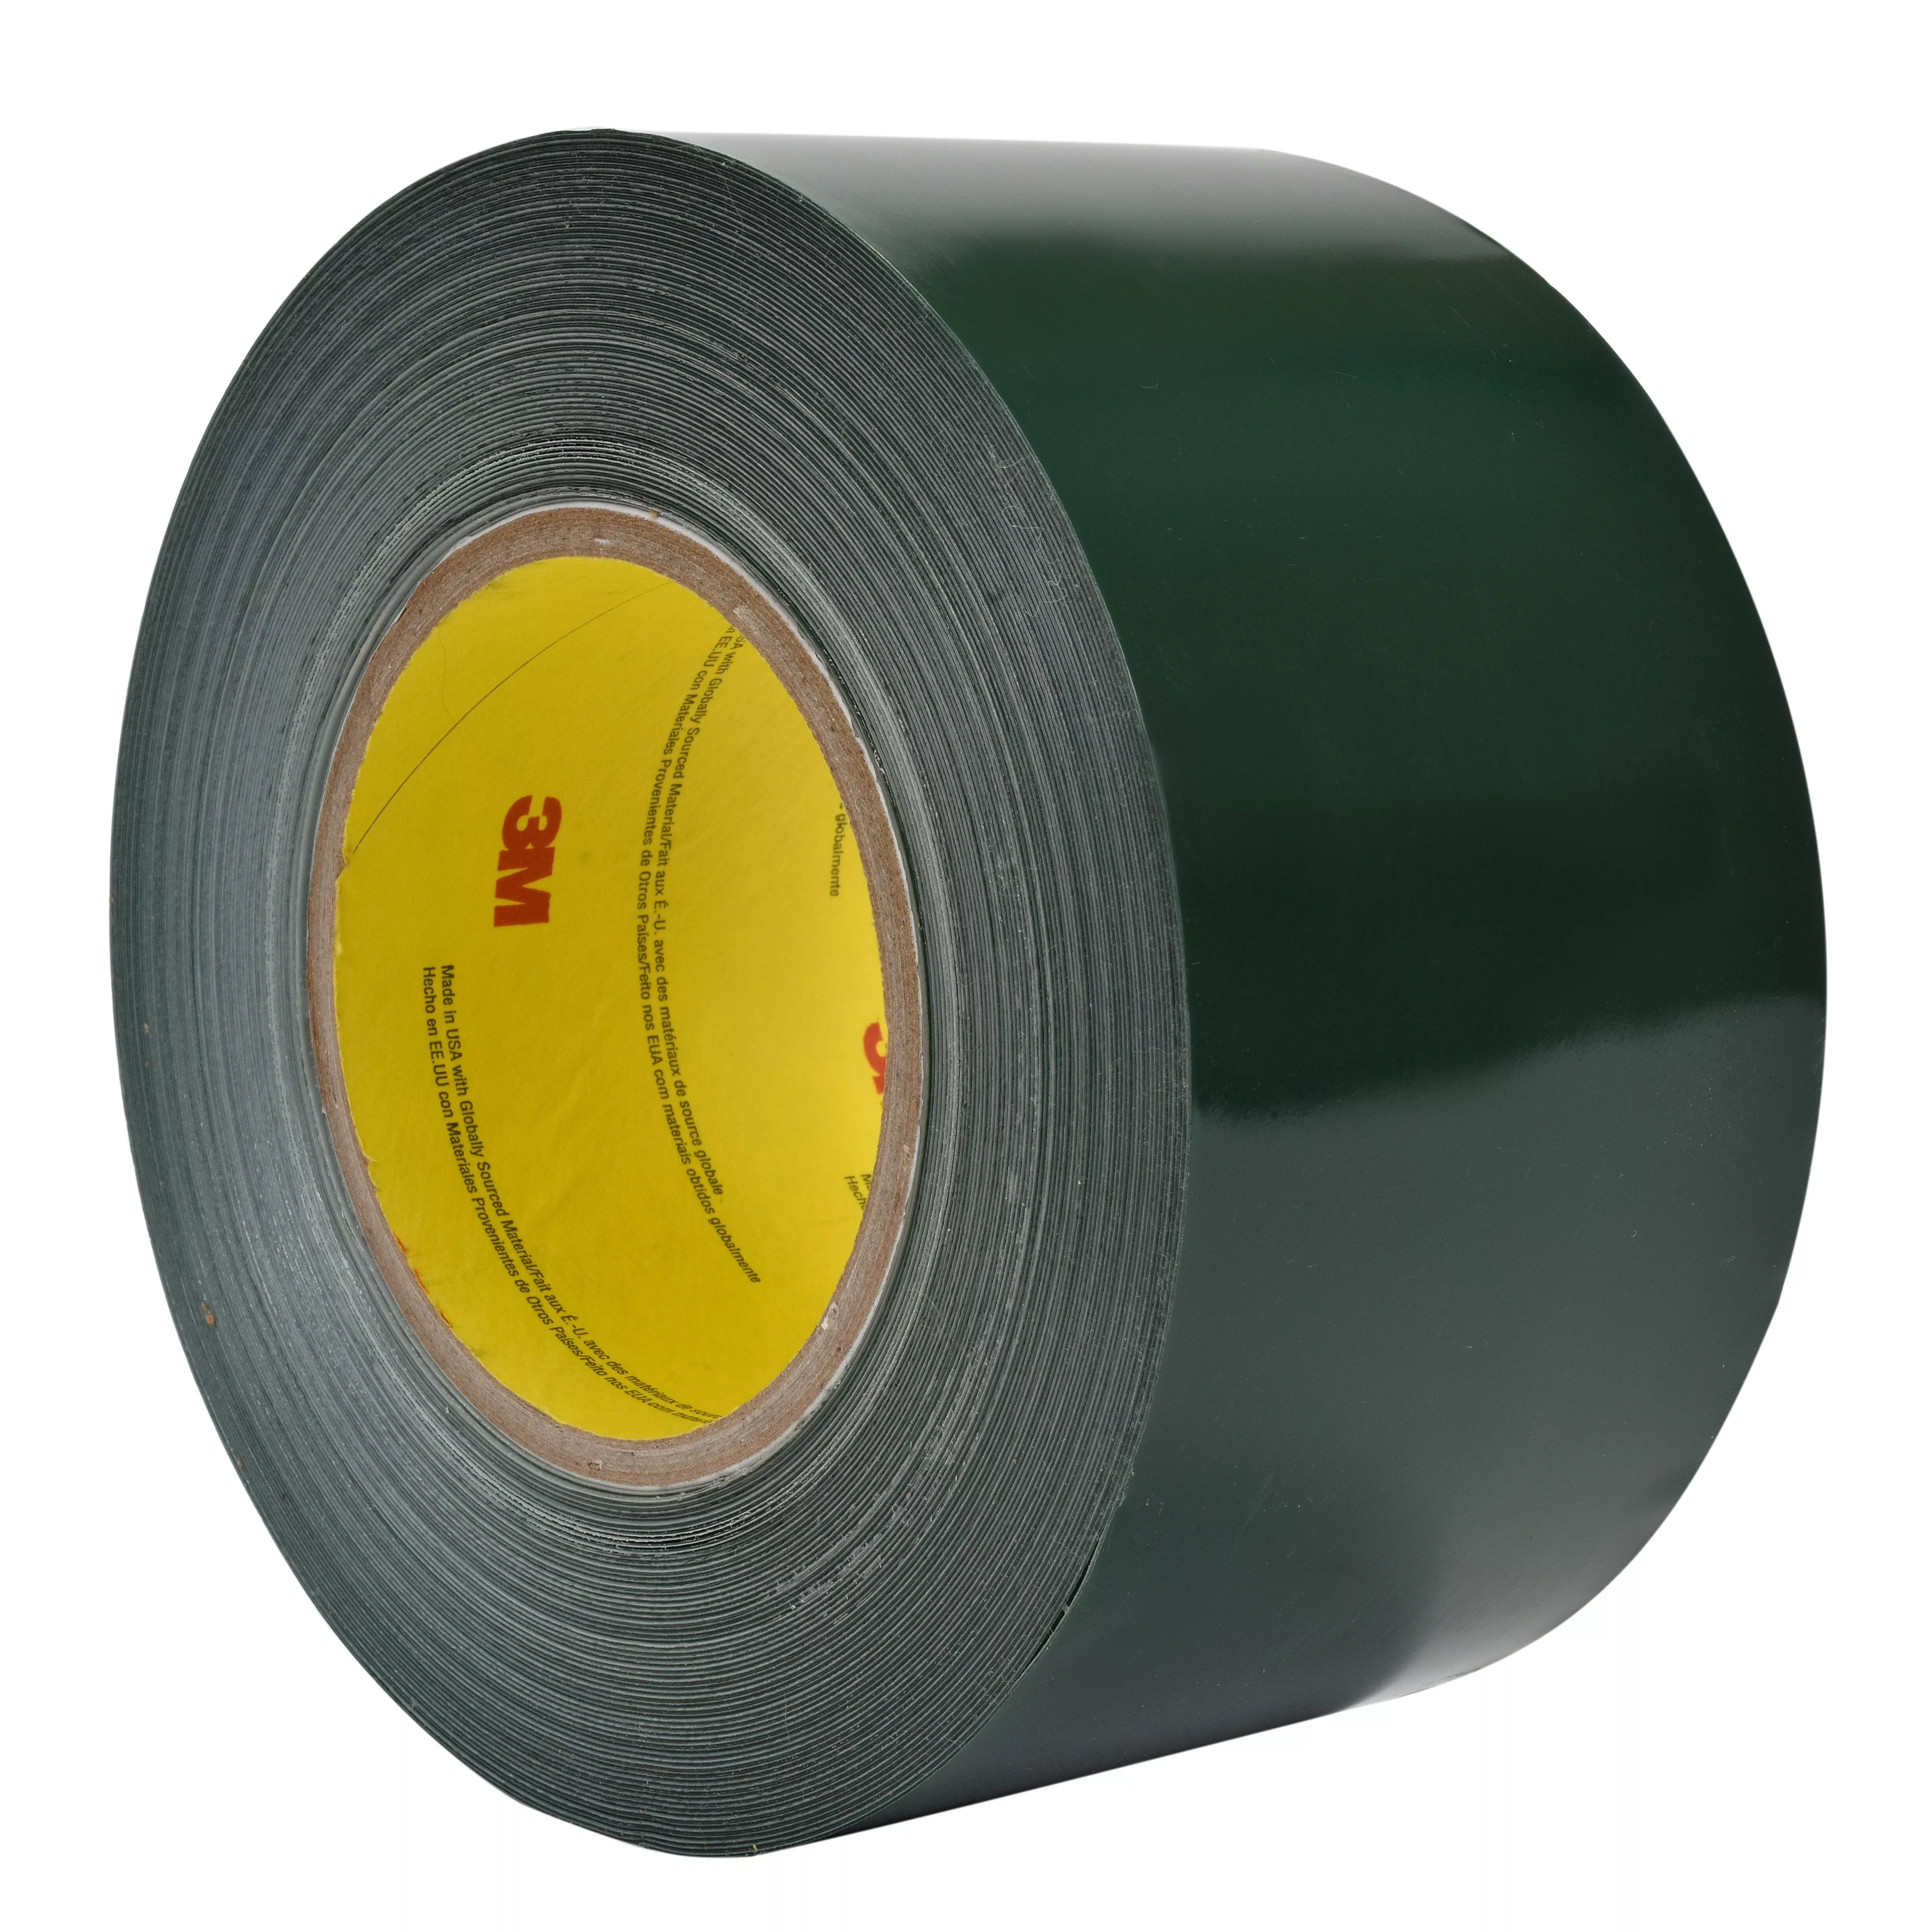 SKU 7010312510 | 3M™ Sealing and Holding Tape 8069